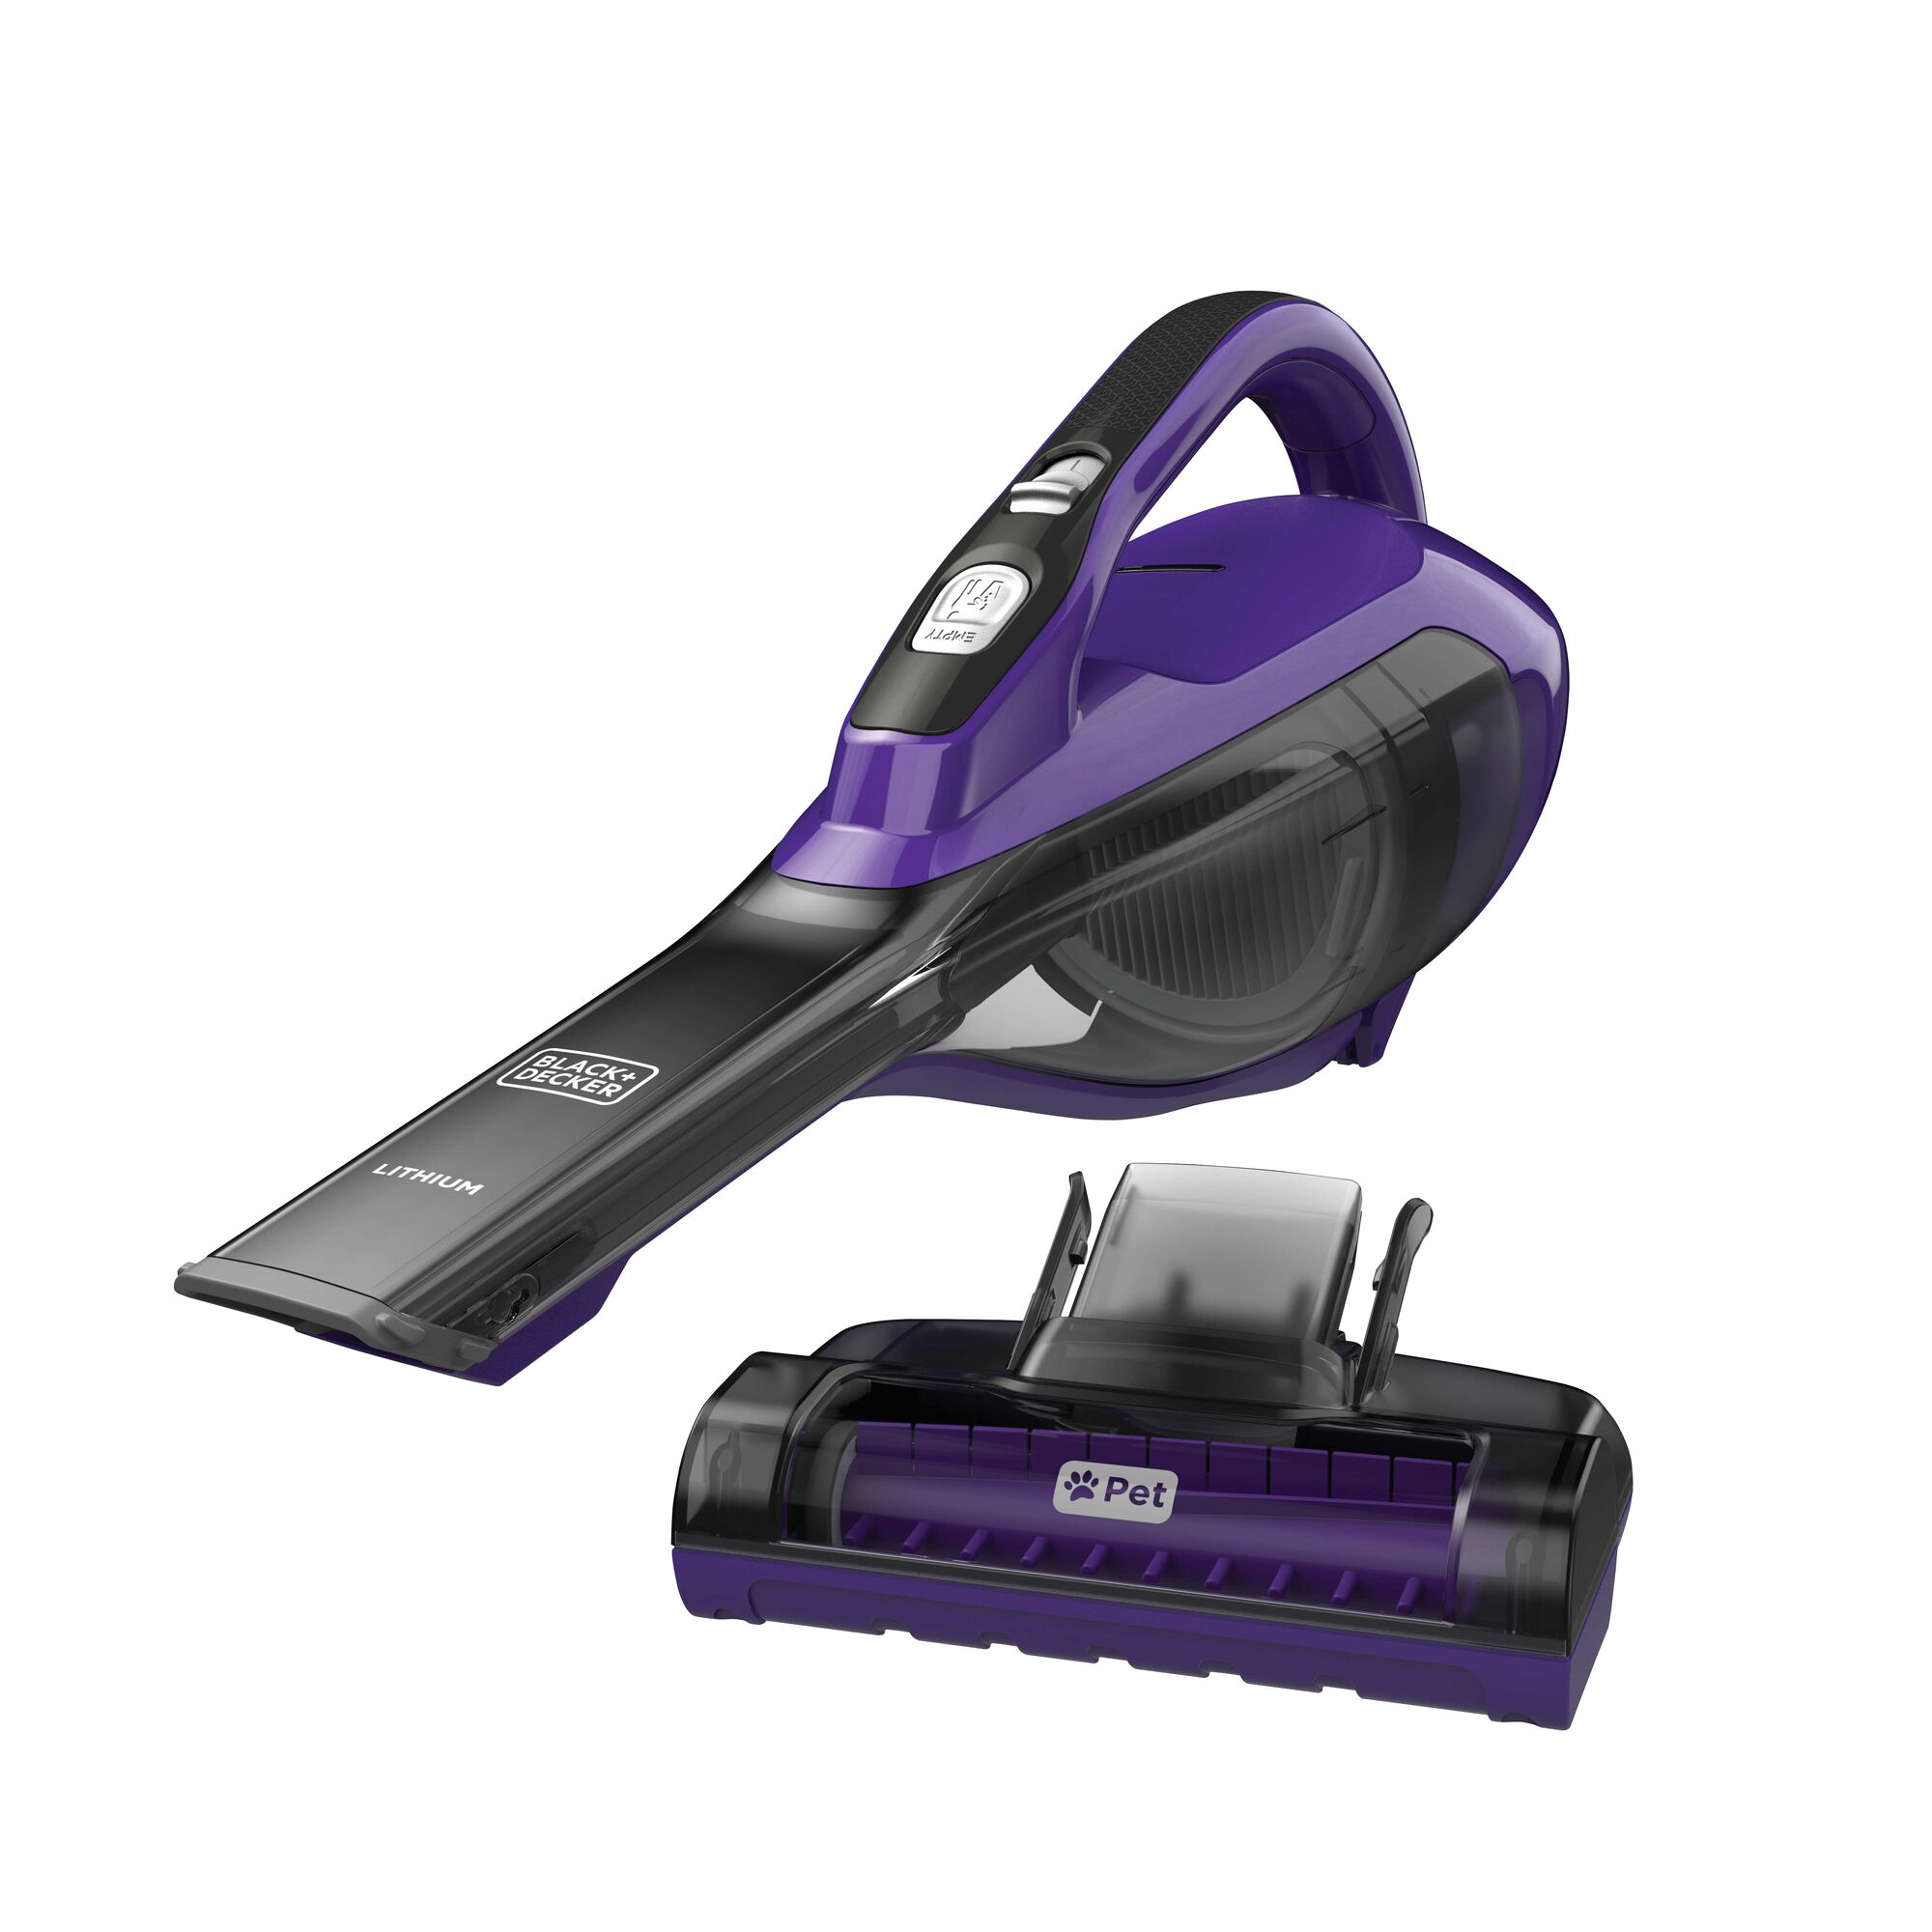 dustbuster Advanced Clean pet cordless hand vacuum with complete kit.